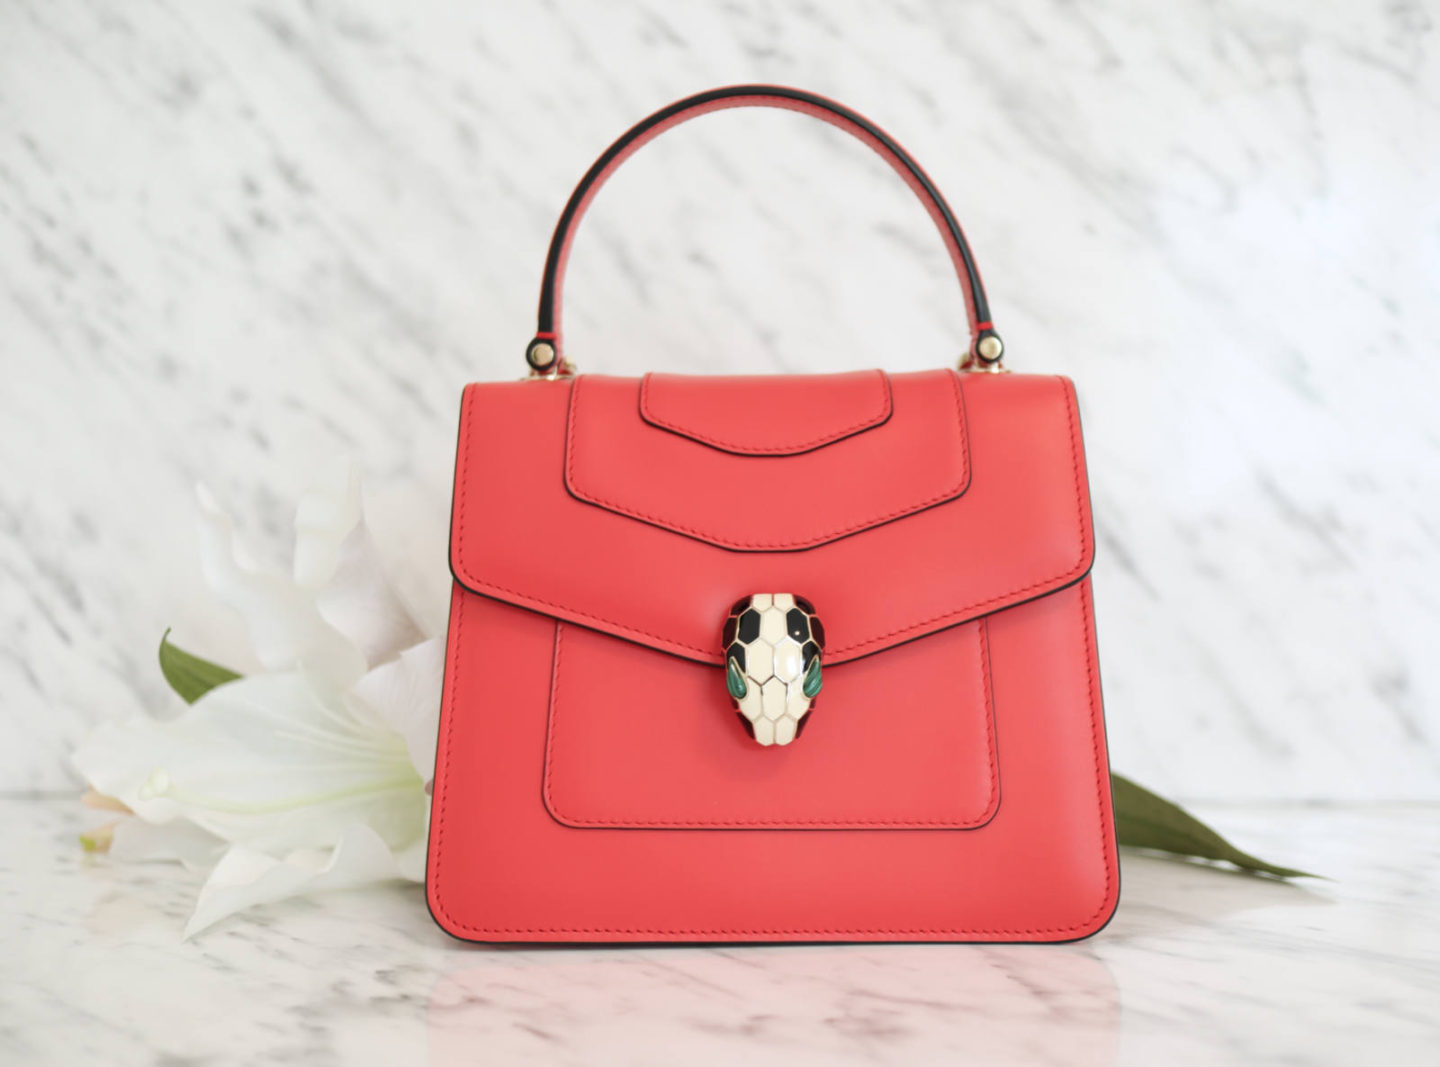 My designer handbag collection - Curated by Kirsten